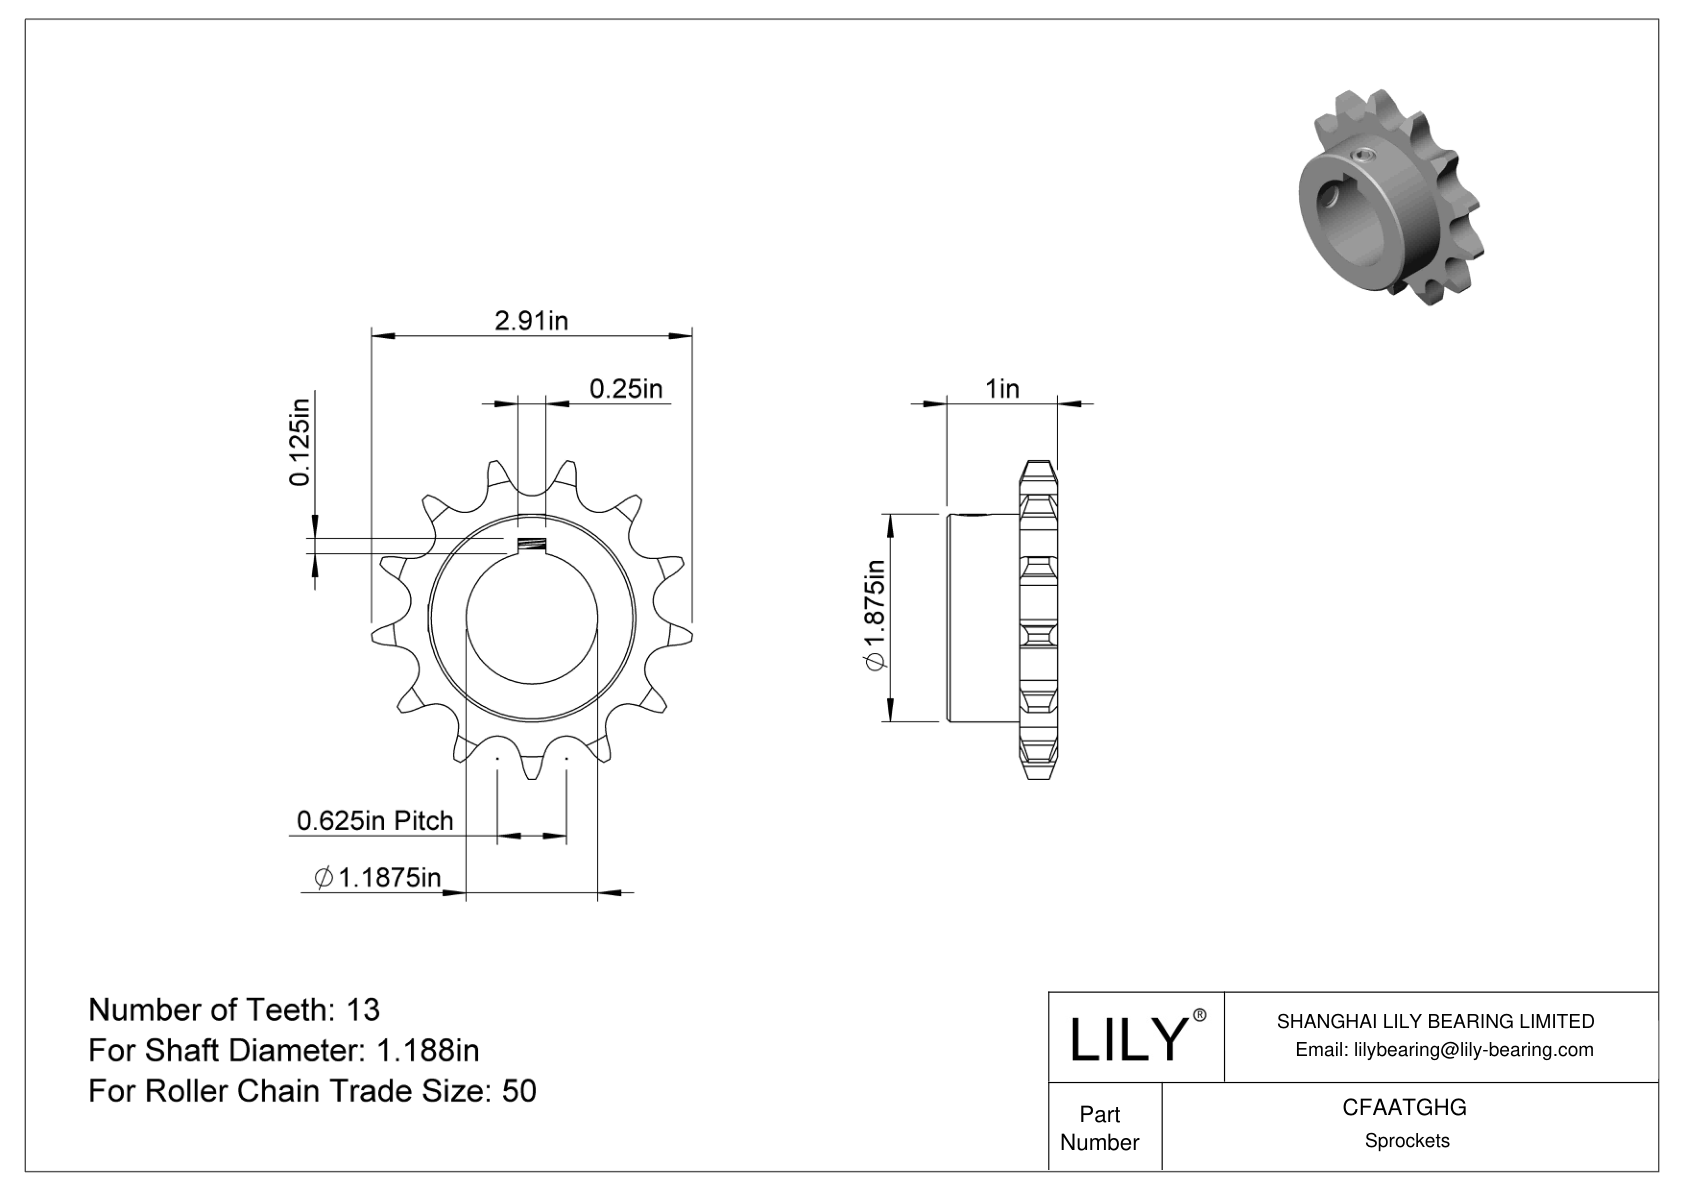 CFAATGHG Wear-Resistant Sprockets for ANSI Roller Chain cad drawing